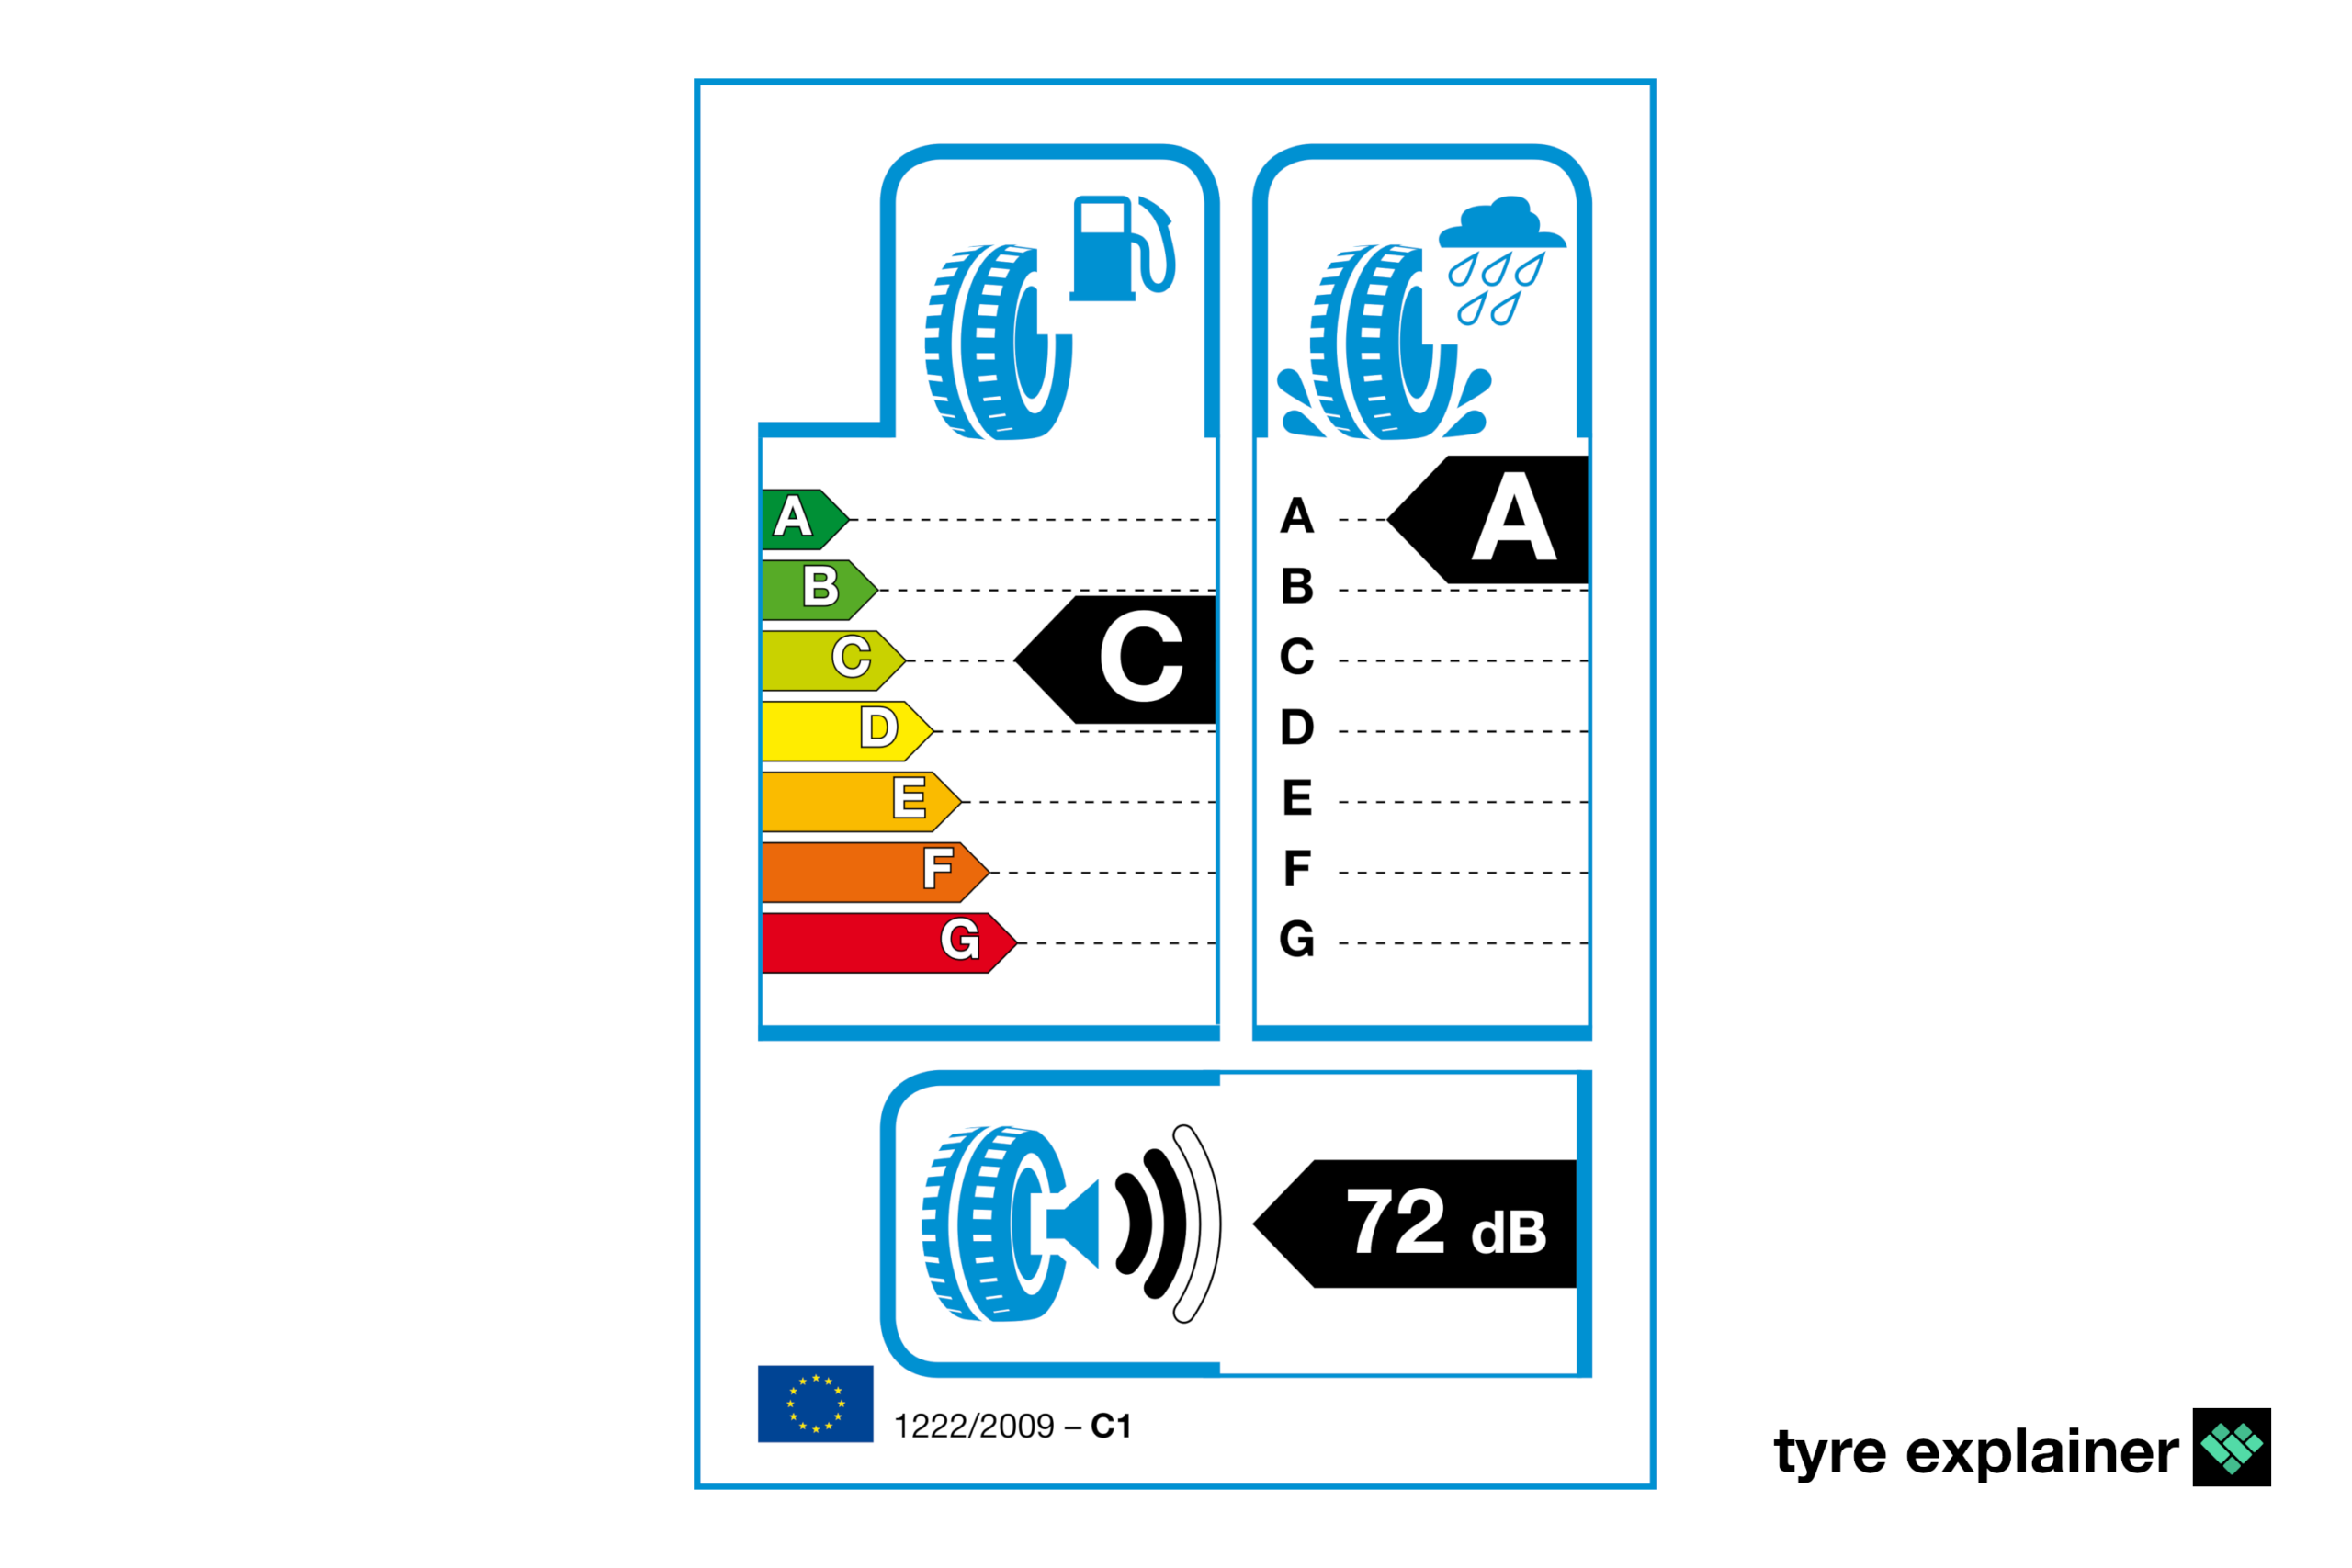 What is the tyre label?